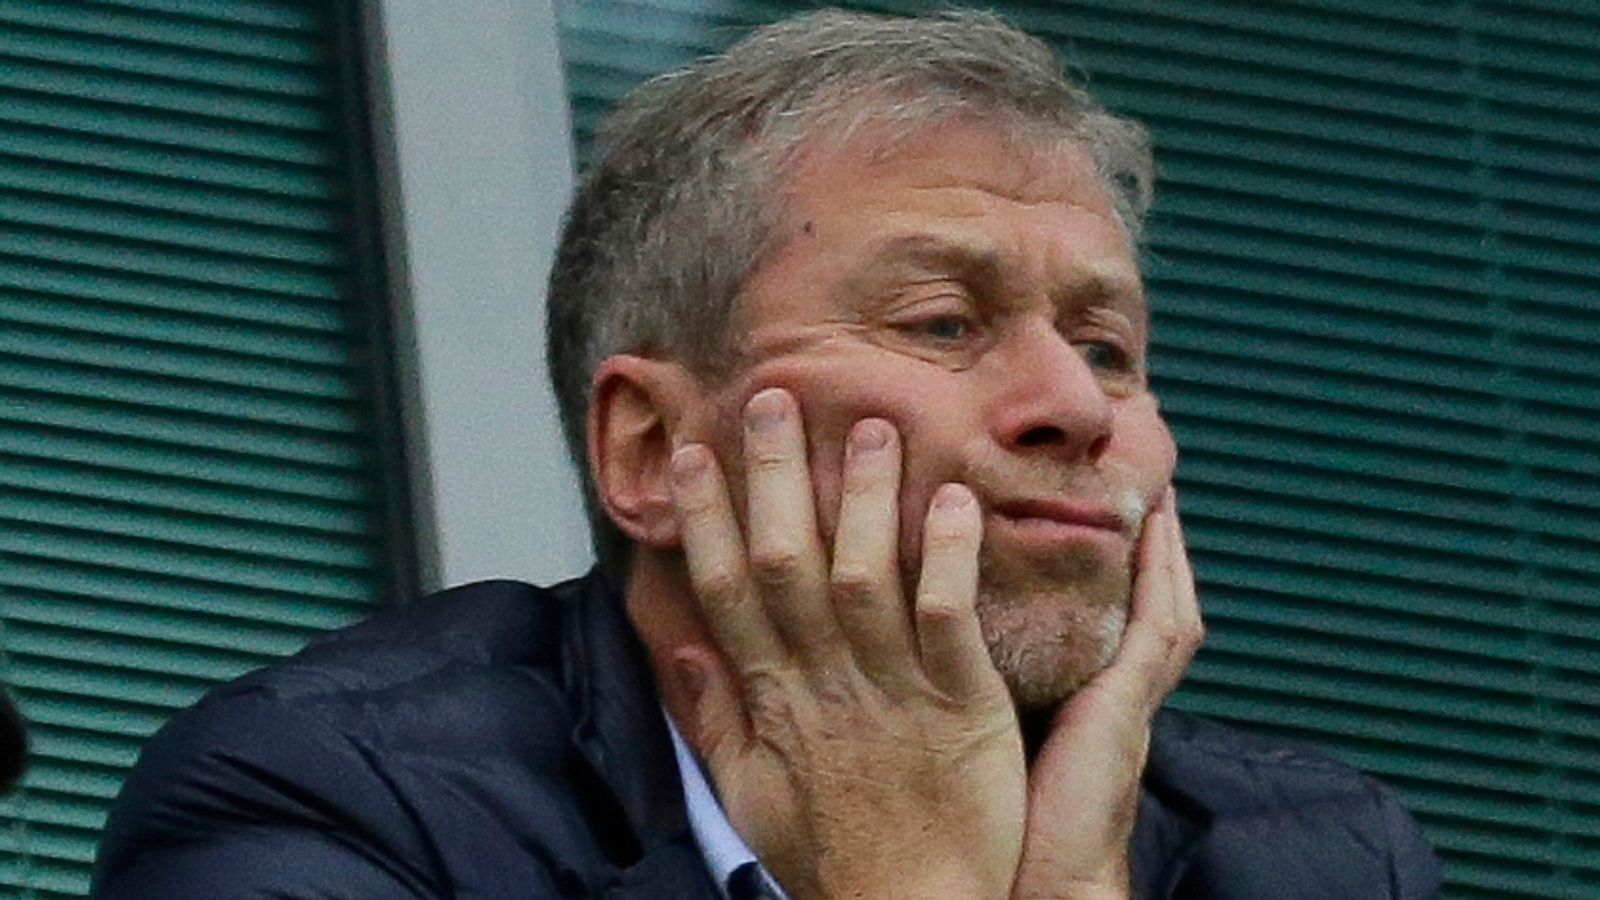 Roman Abramovich willing to listen to offers for Chelsea amid UK sanctions fear